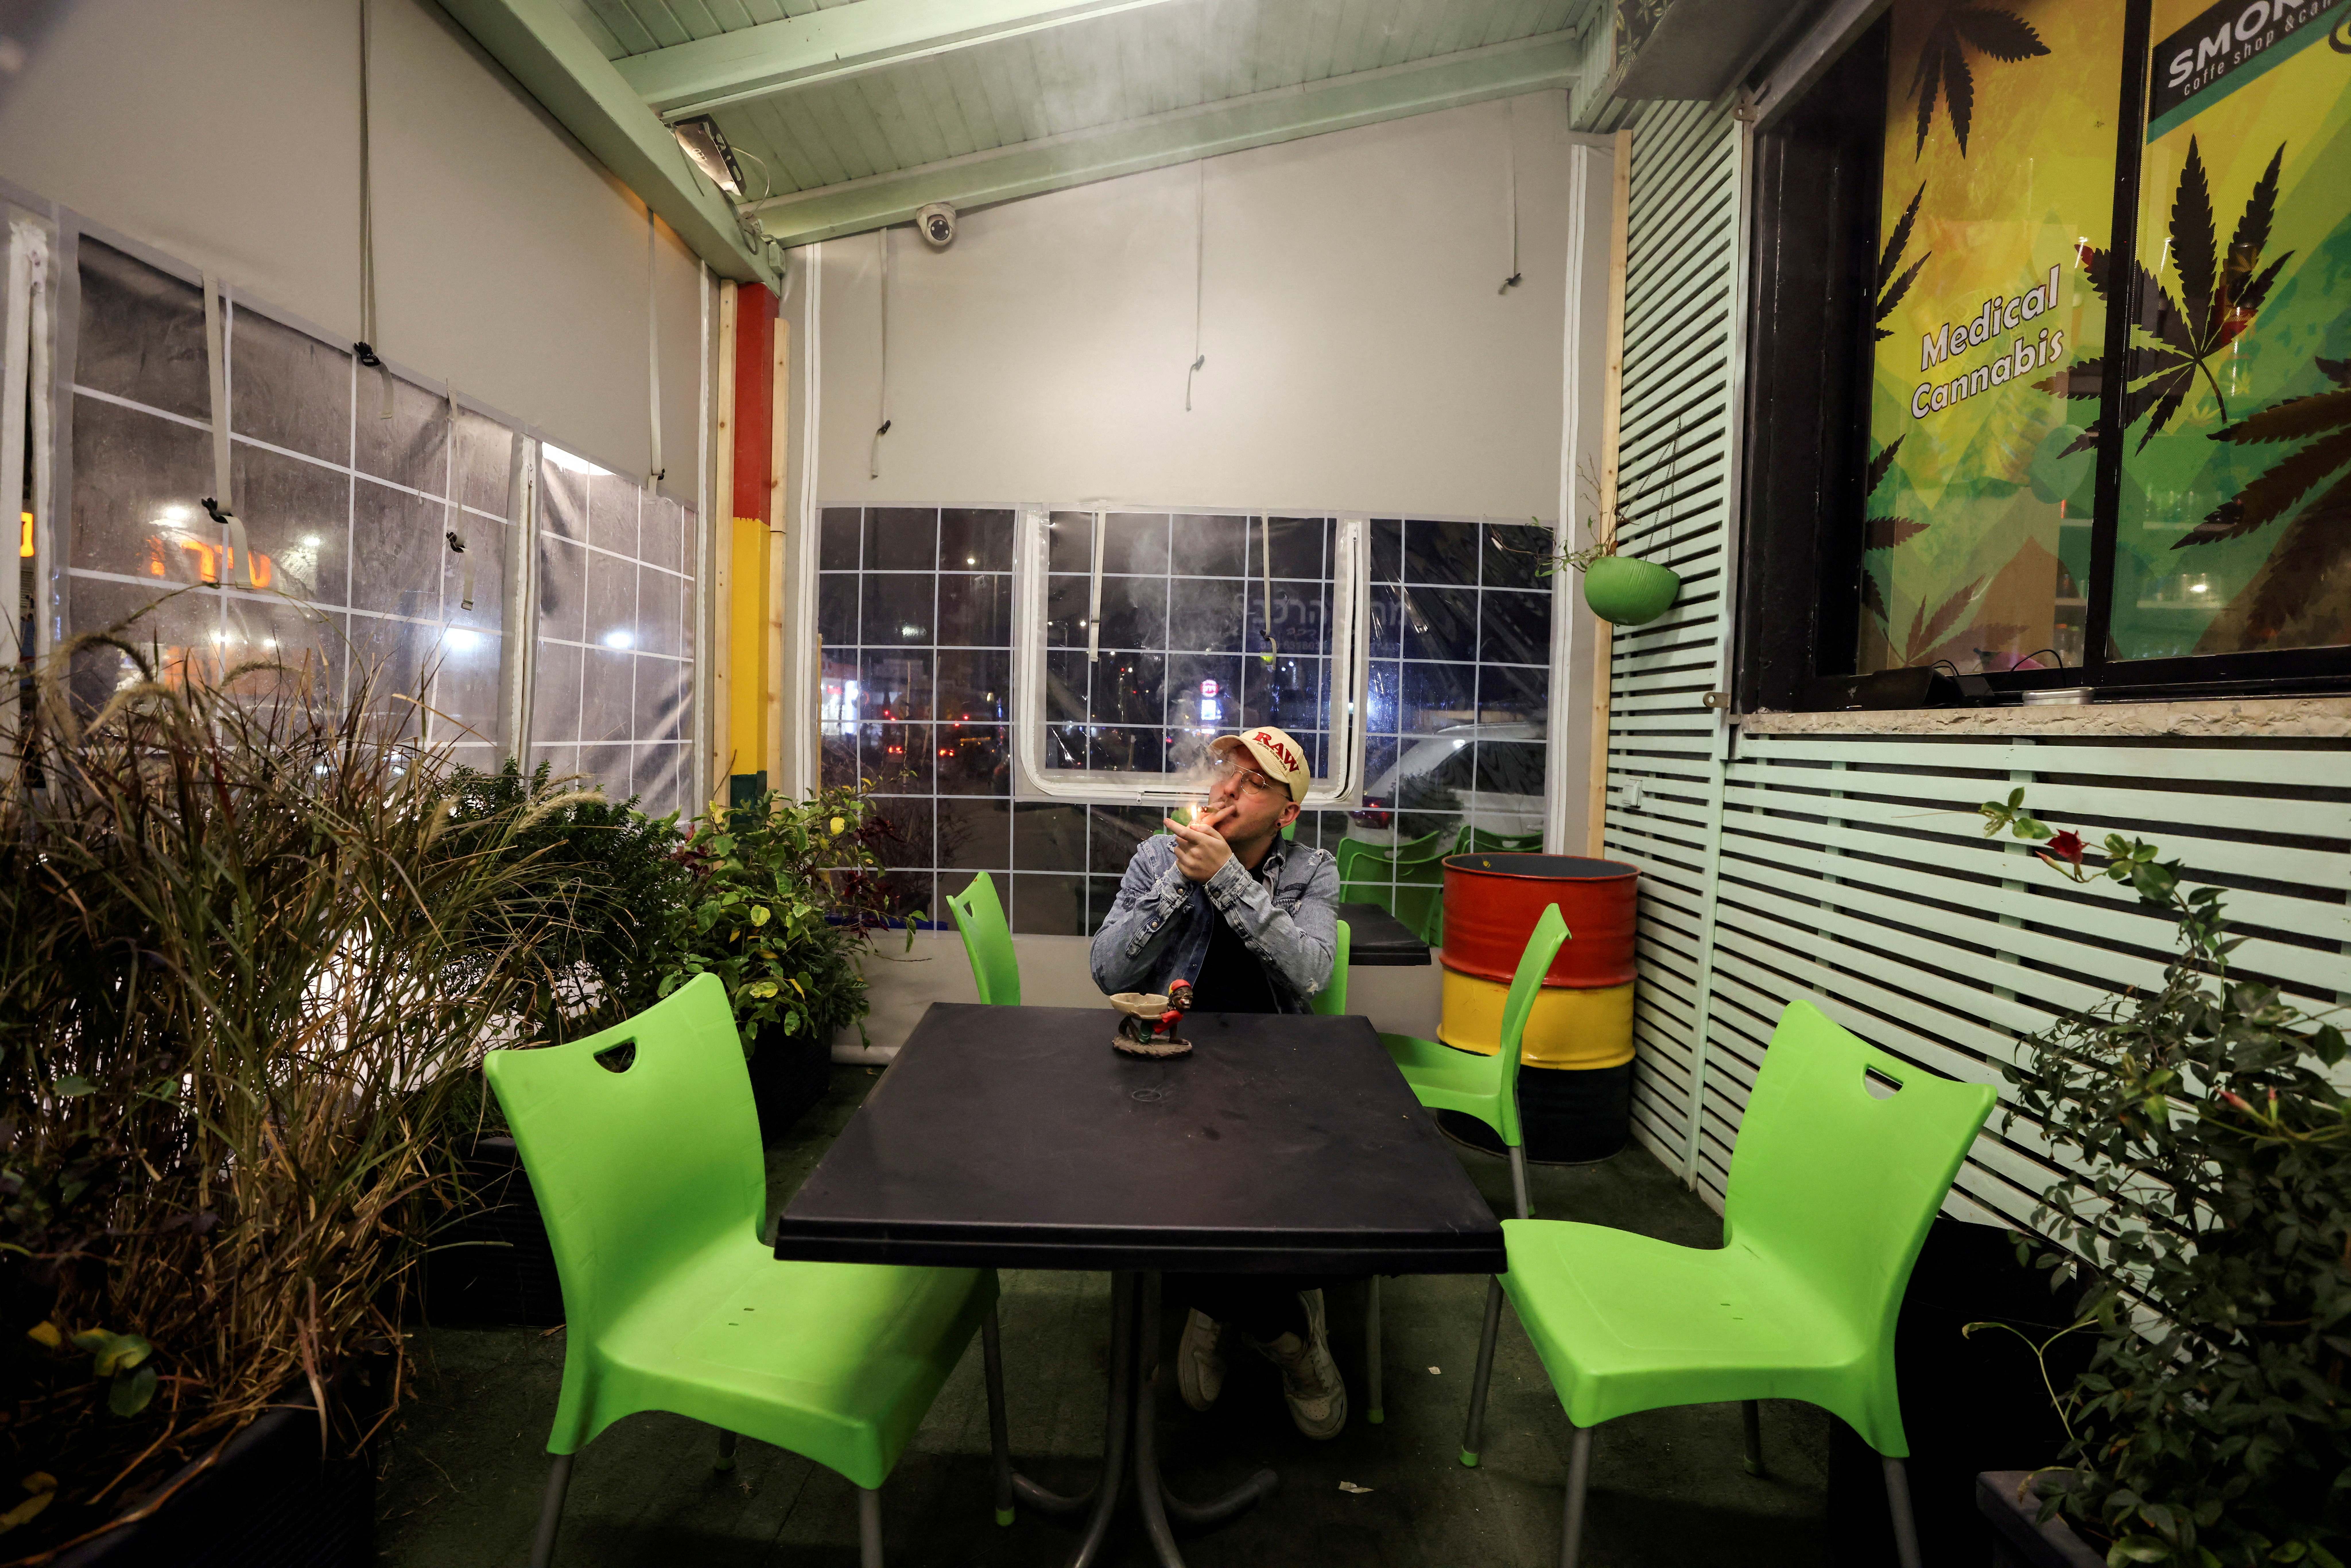 A worker smokes a joint at a medical cannabis cafe in Tira, an Arab village in central Israel